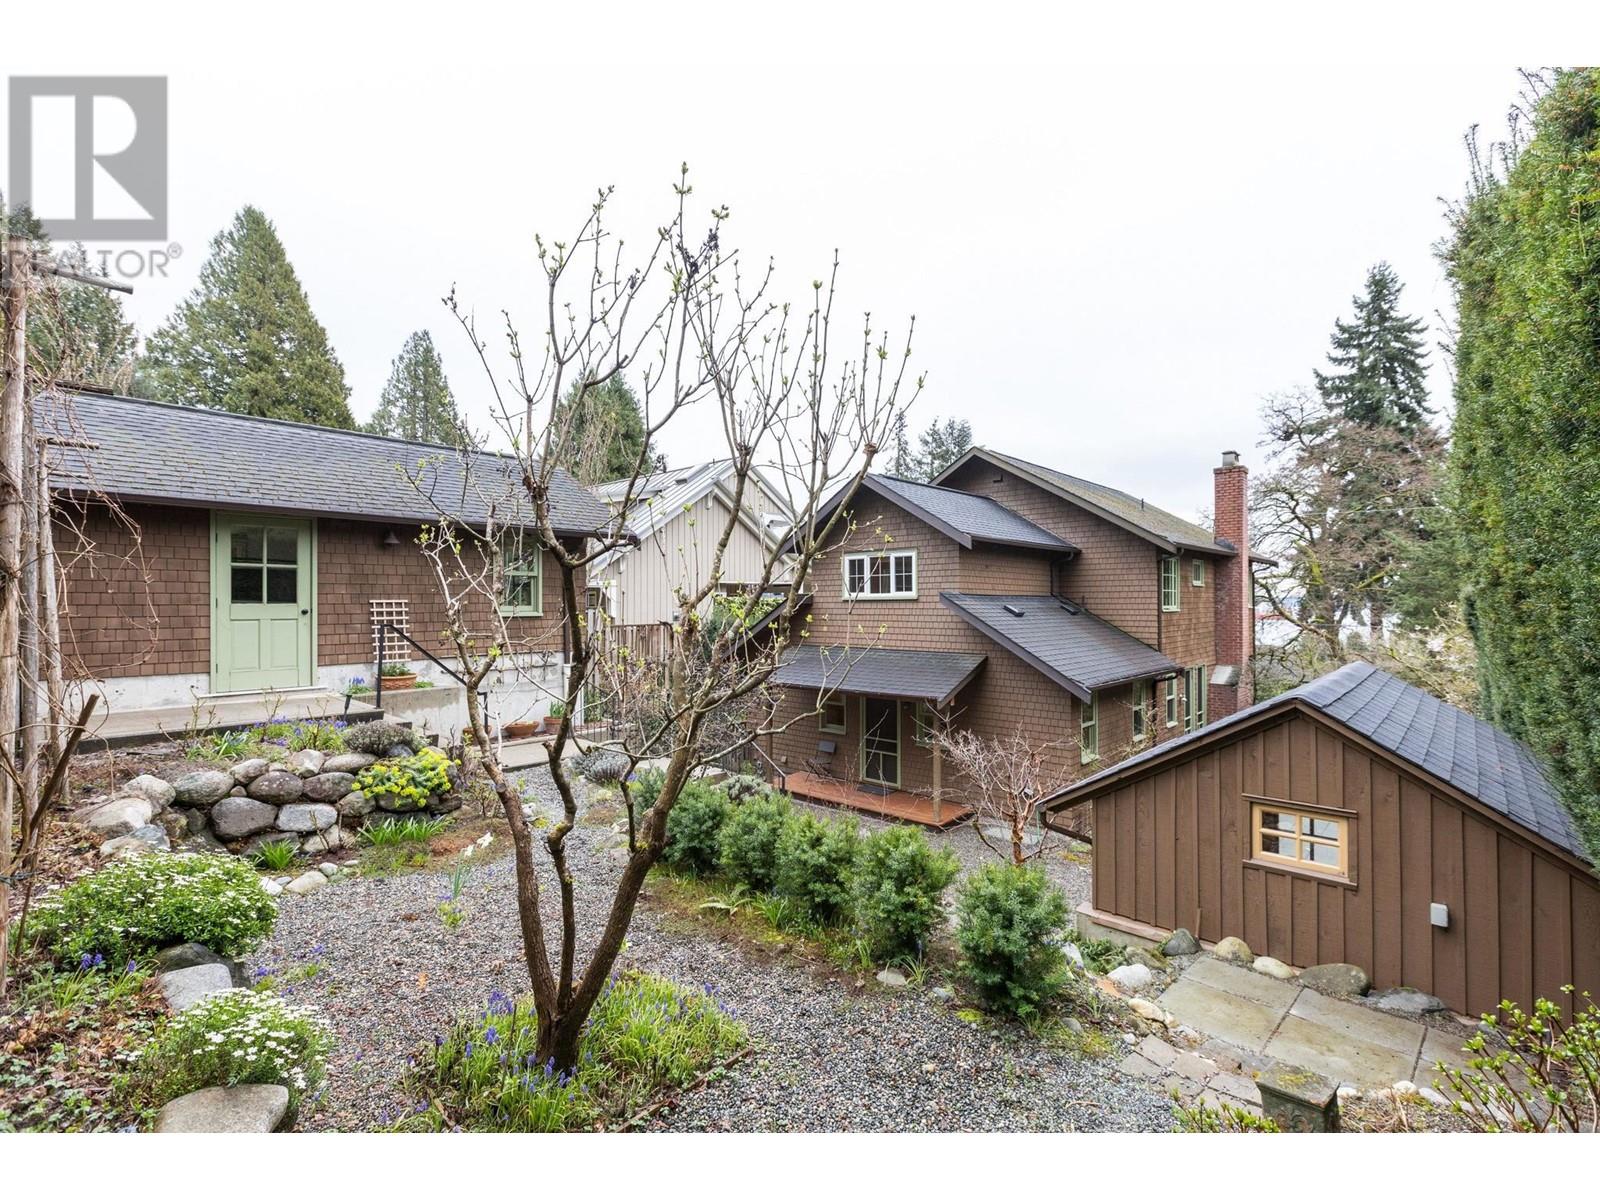 2757 MATHERS AVENUE, west vancouver, British Columbia